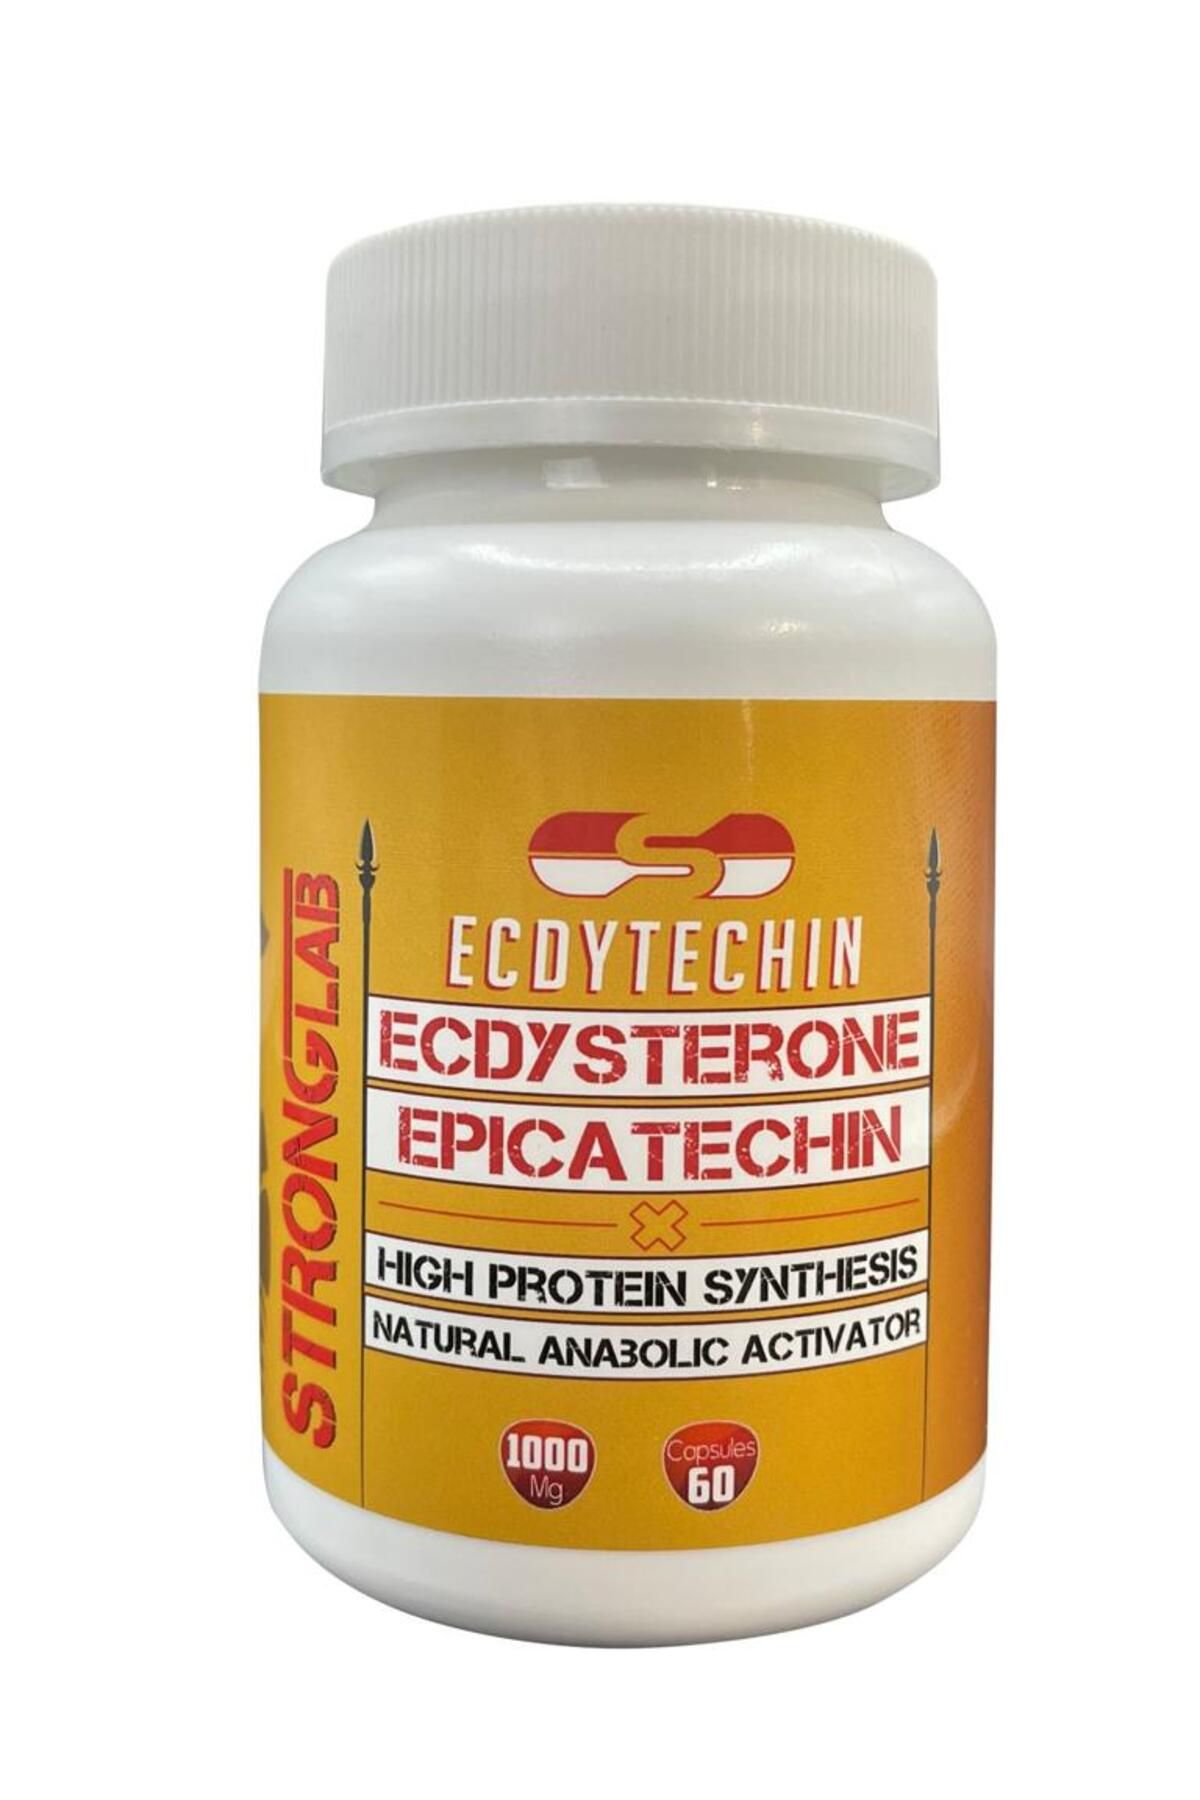 Strong lab ECDYSTERONE